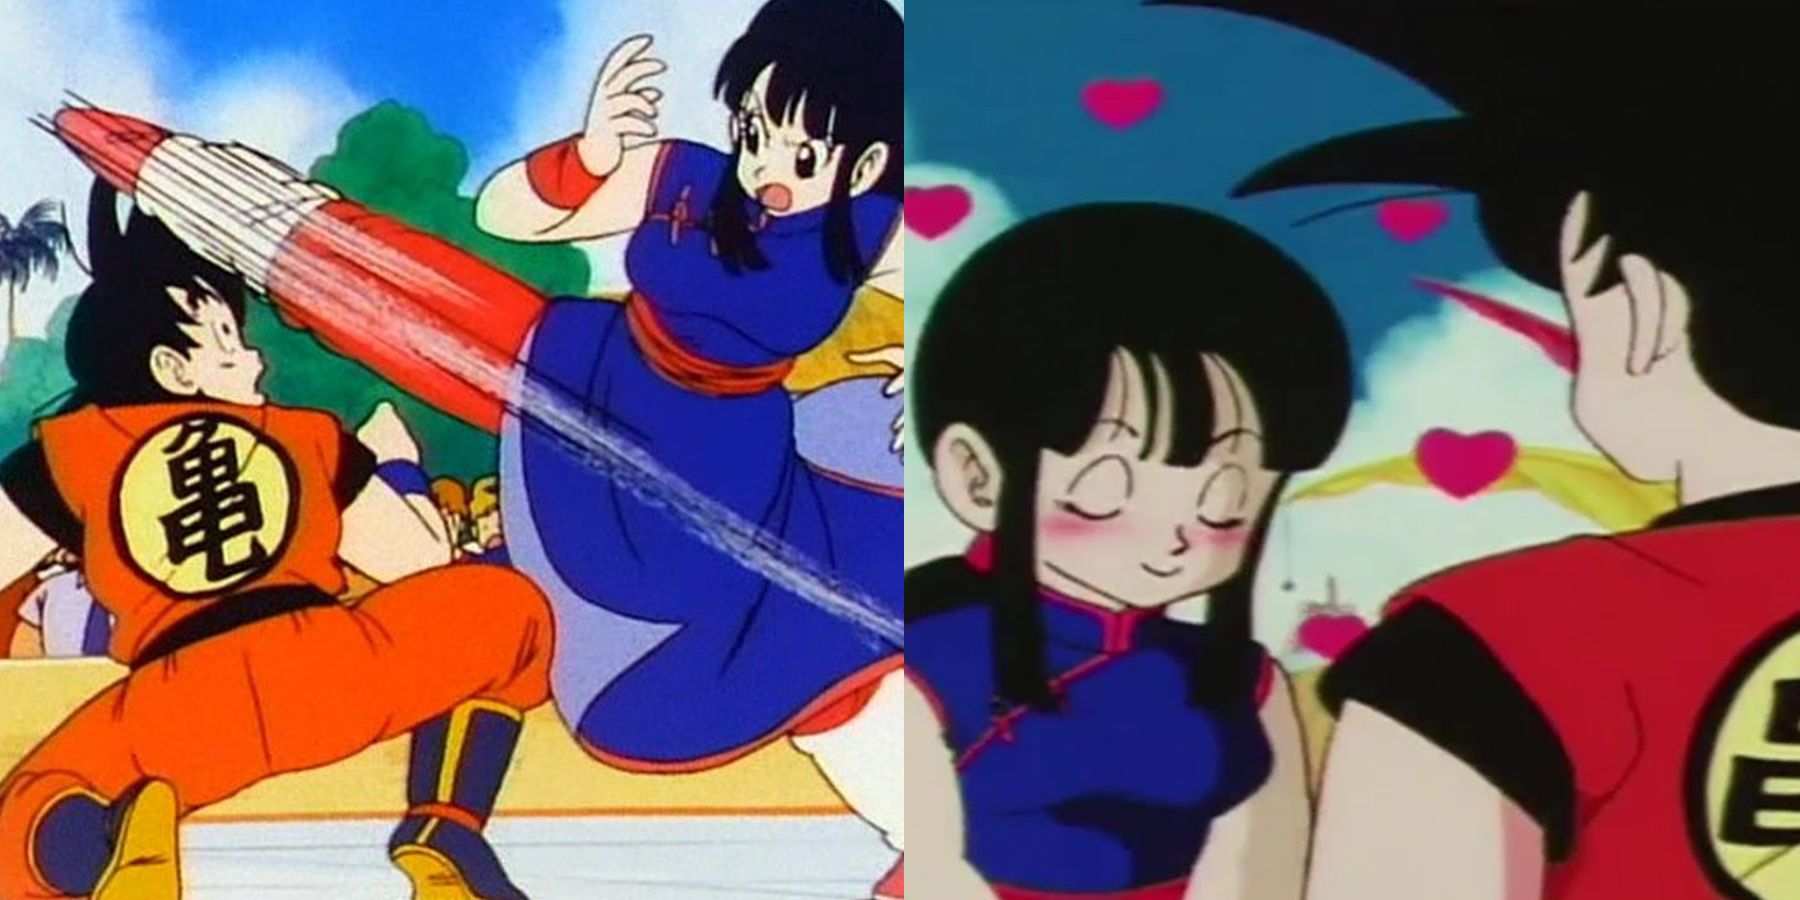 A split image of Goku and Chi-Chi from the anime series Dragon Ball.